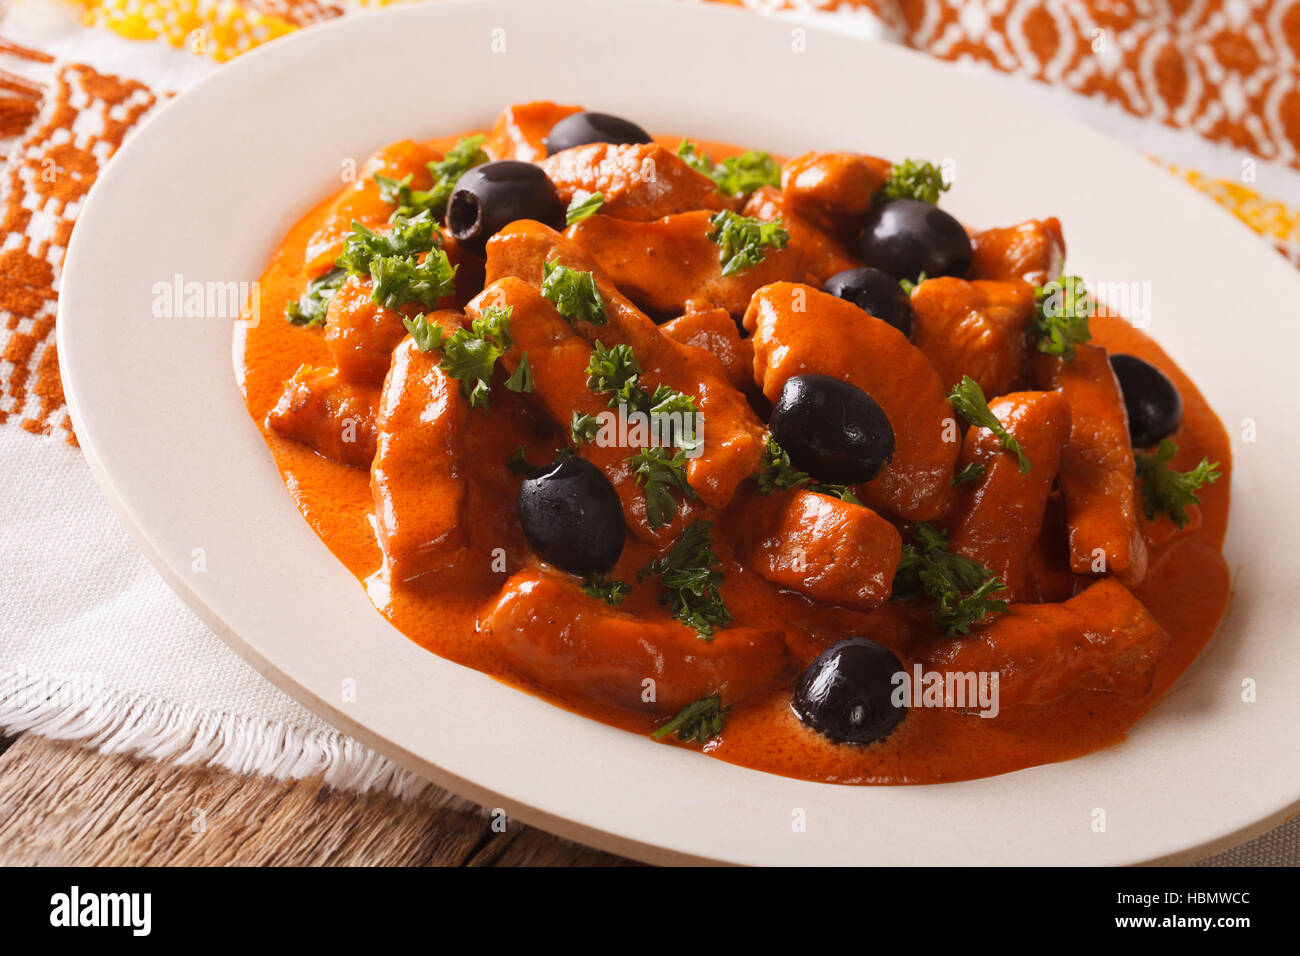 pork stew in a spicy sauce of wine, tomatoes and cream with black olives close-up on a plate. Horizontal Stock Photo